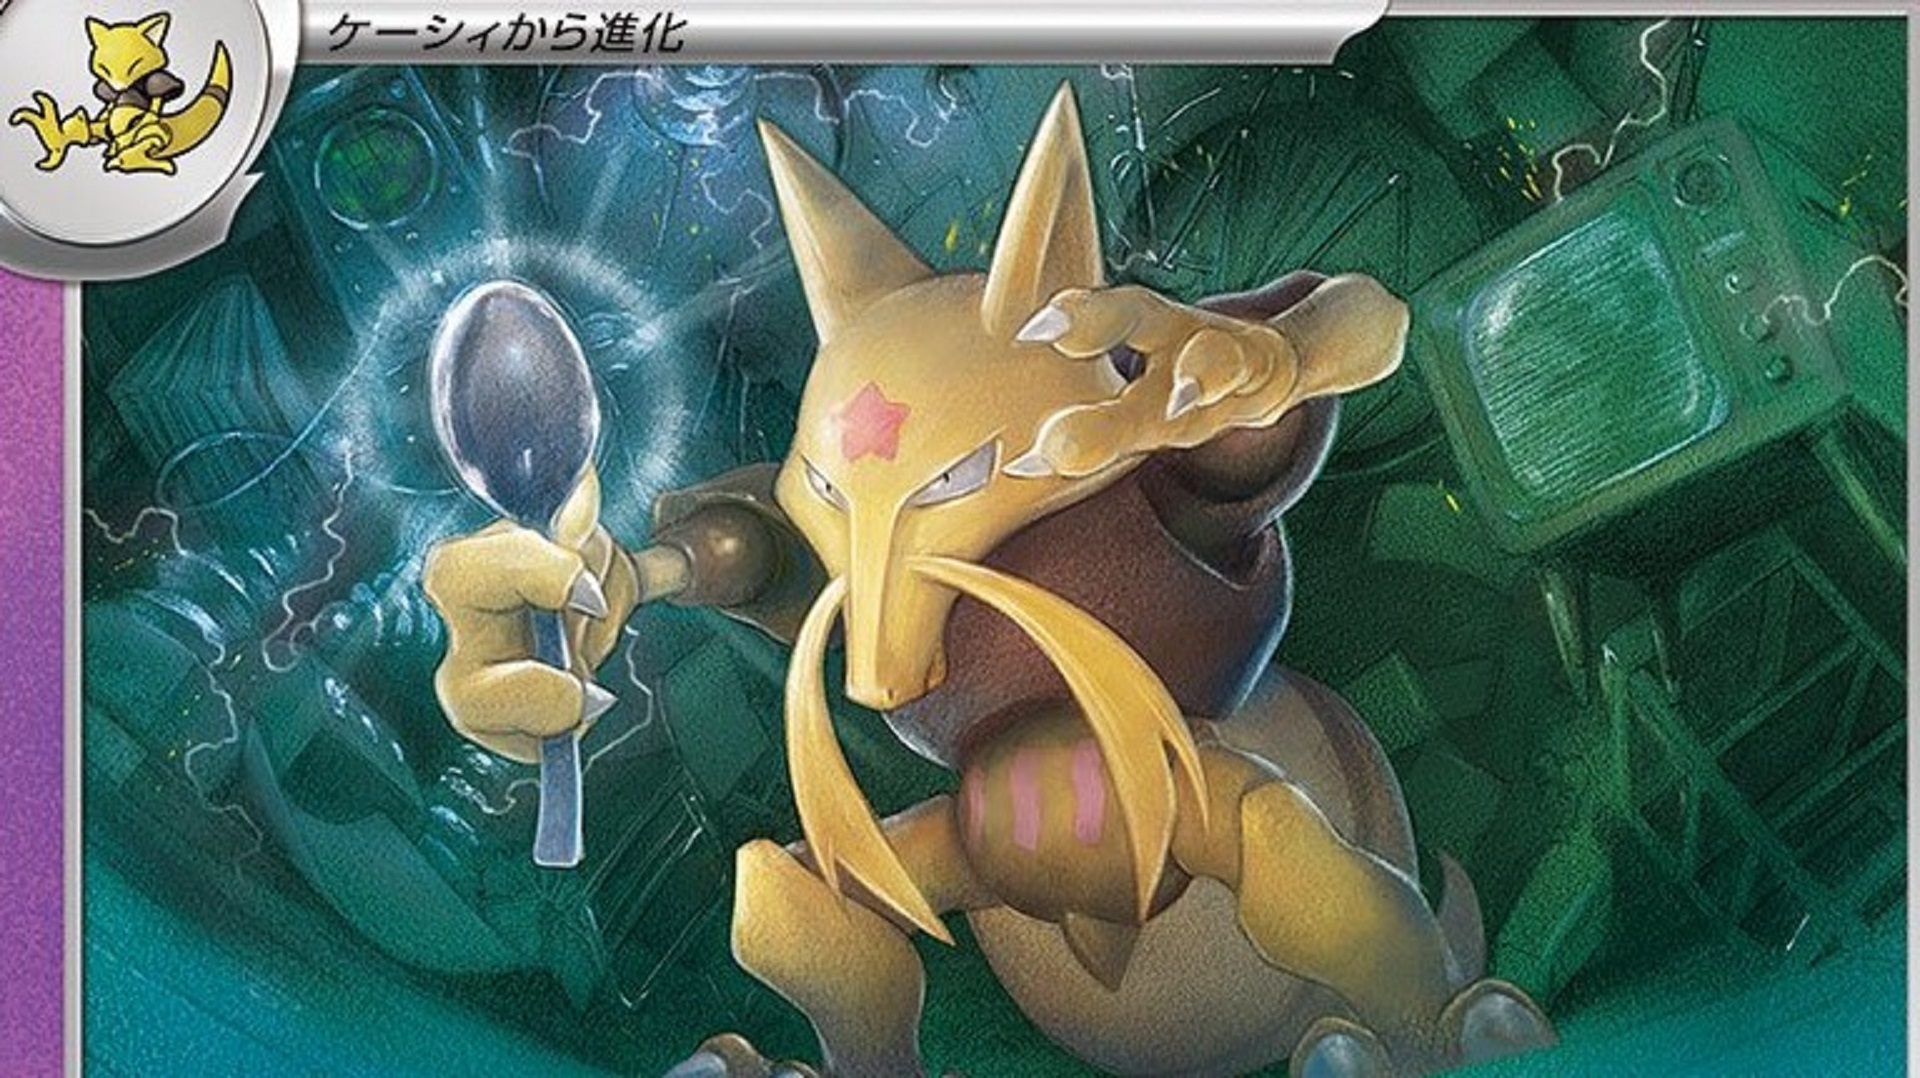 Kadabra card from Pokémon Card 151, which is available for pre-order from Japan